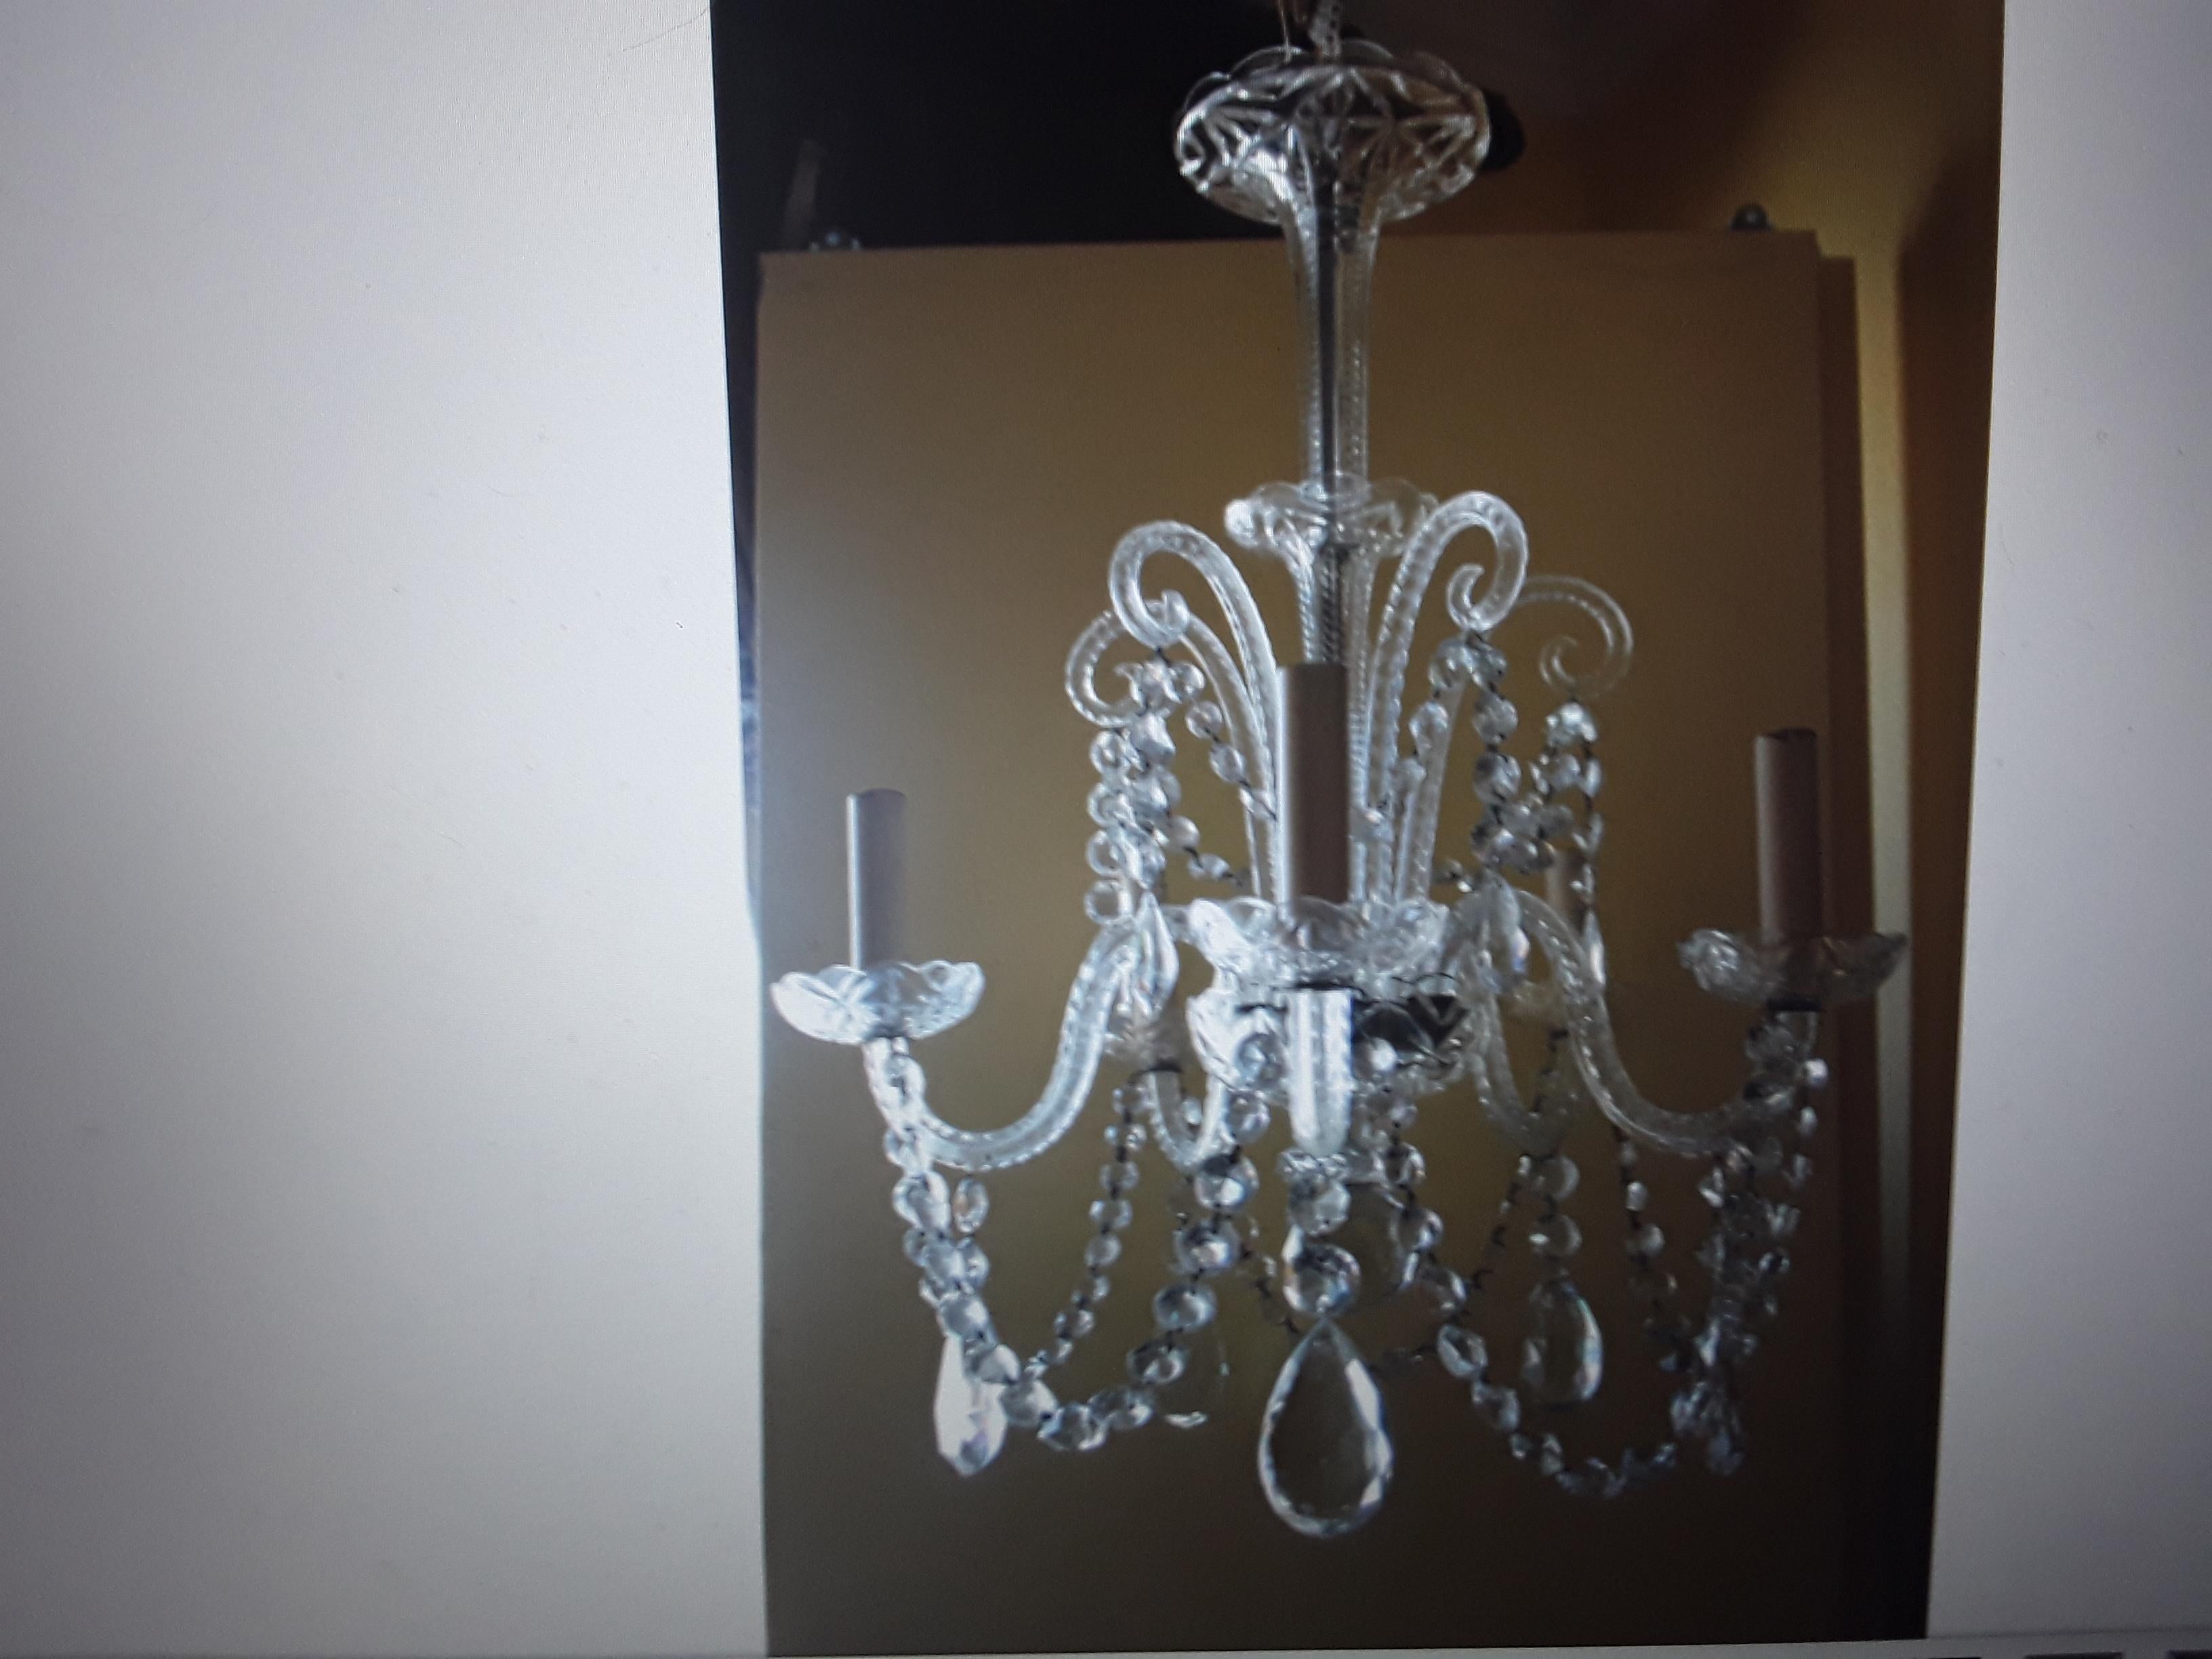 Masterpiece in Cut Glass and Lead Crystal. c1890-1900 Antique Anglo Irish Traditional style Cut & Leaded Crystal Chandelier. This is a beauty! We acquired this in Nice, the South of France at auction.